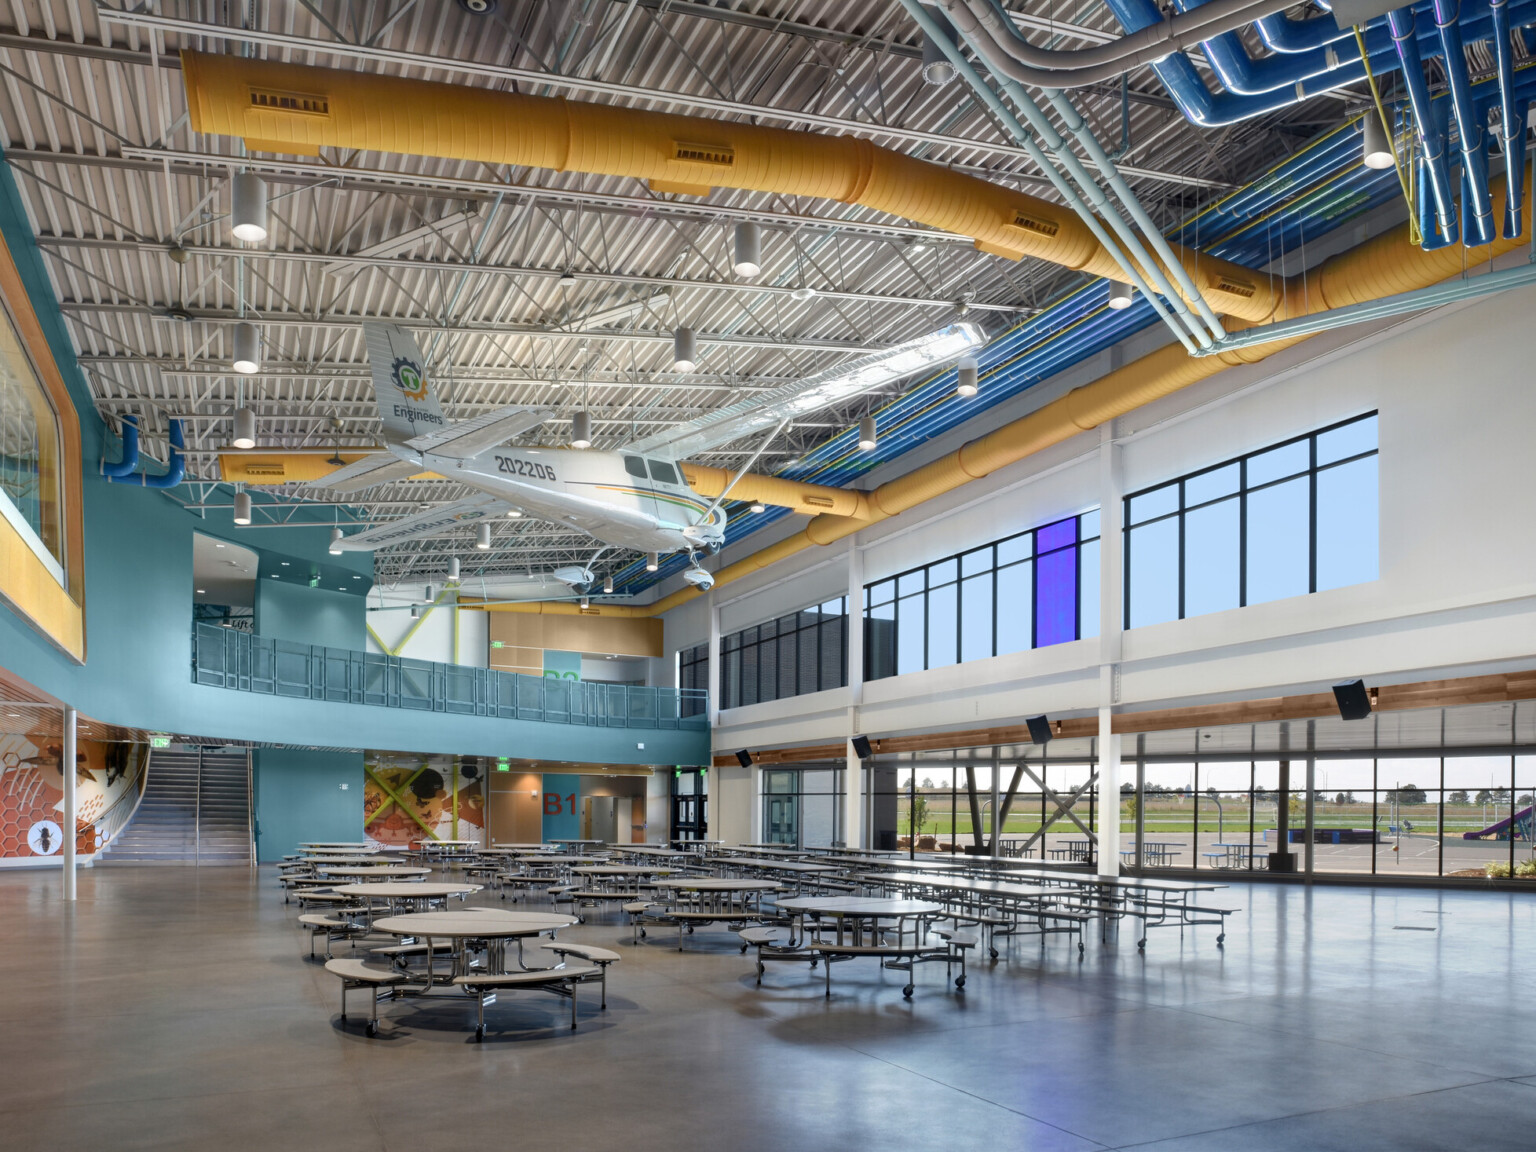 cathedral ceilings, large windows, teal blue walls, polished concrete flooring, dining tables and benches